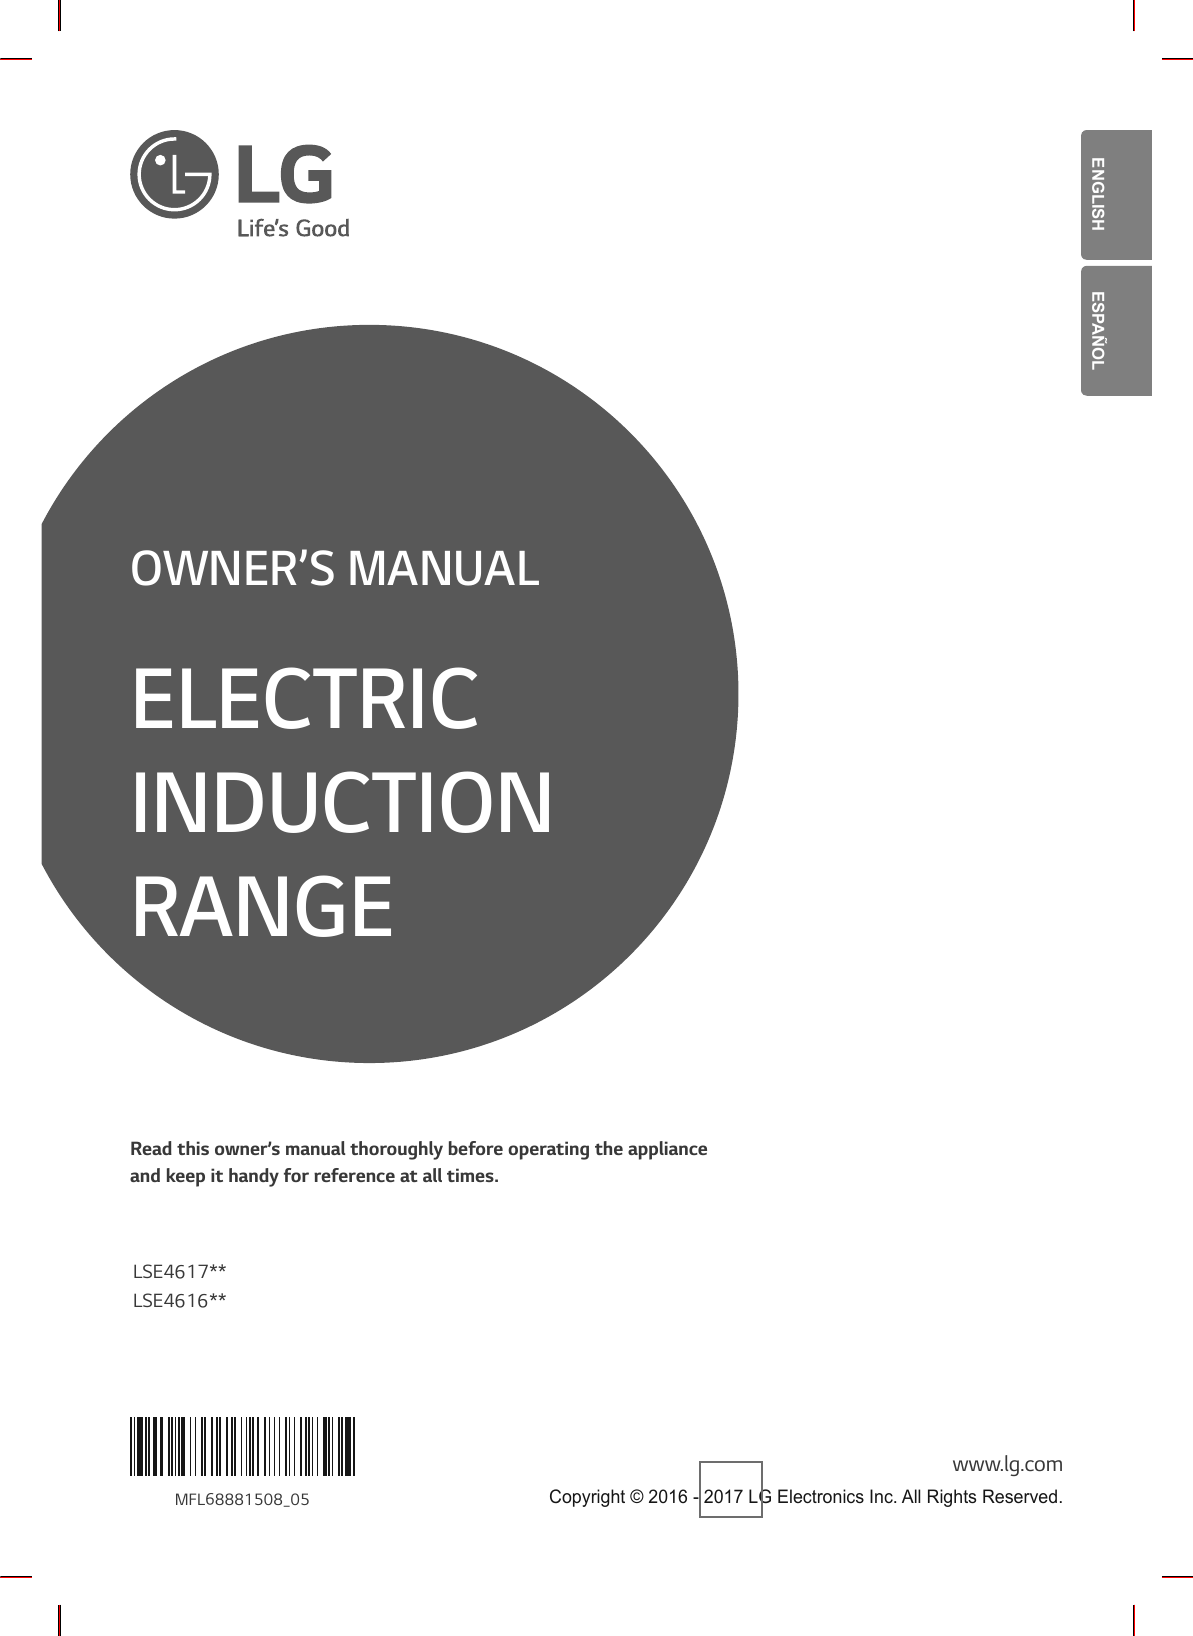 ENGLISH ESPAÑOLOWNER’S MANUALELECTRIC INDUCTION RANGERead this owner’s manual thoroughly before operating the appliance  and keep it handy for reference at all times.www.lg.comMFL68881508_05LSE4617**LSE4616** Copyright © 2016 - 2017 LG Electronics Inc. All Rights Reserved.